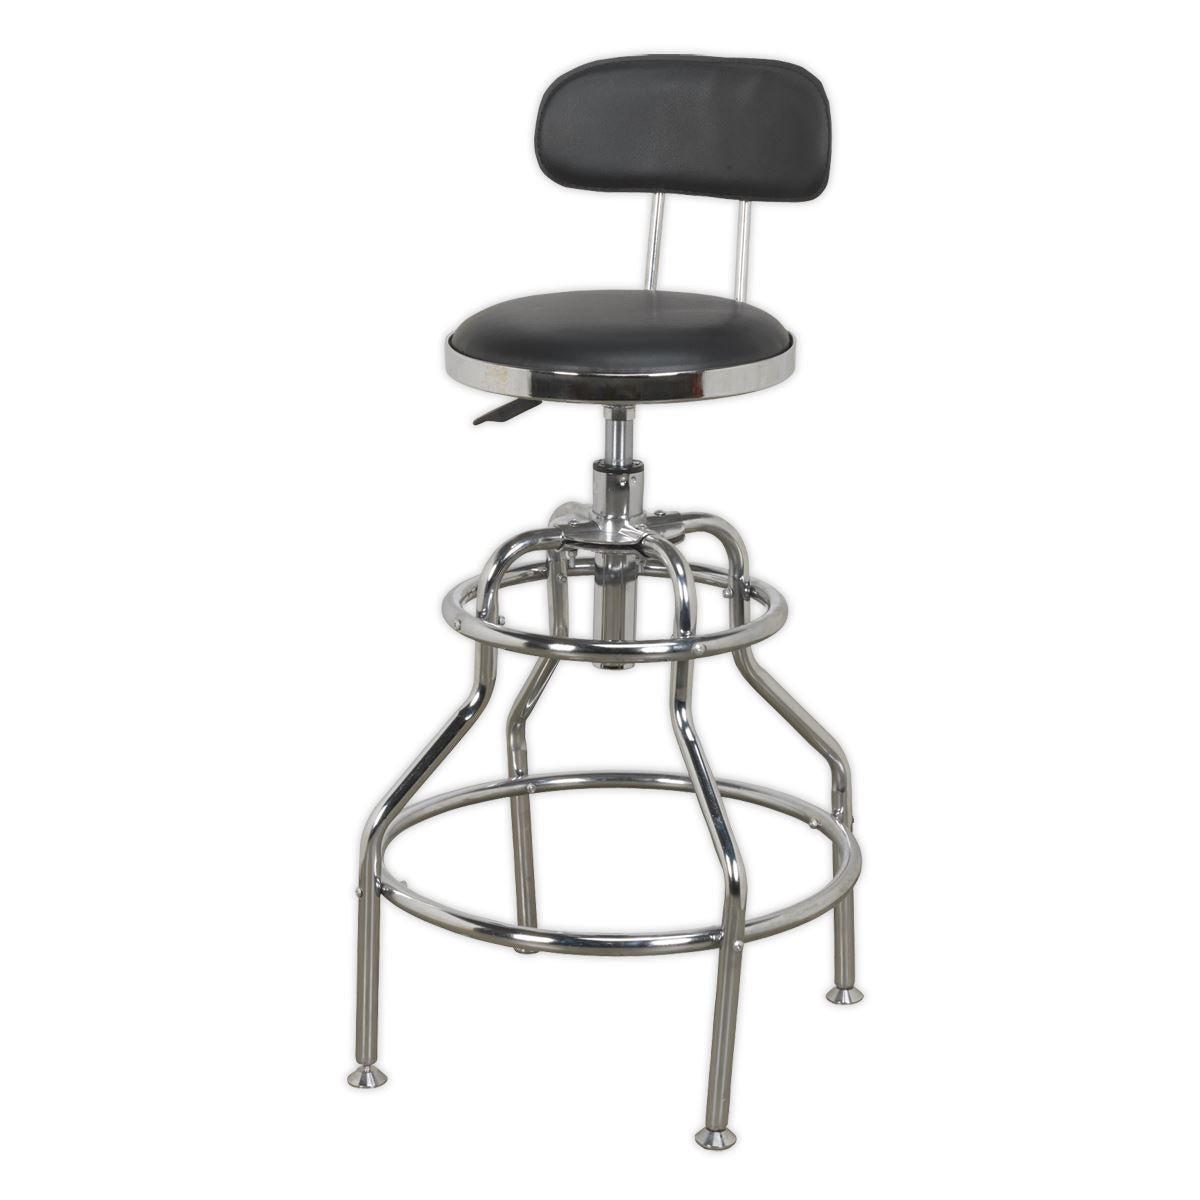 Sealey Pneumatic Workshop Stool with Adjustable Height Swivel Seat & Back Rest